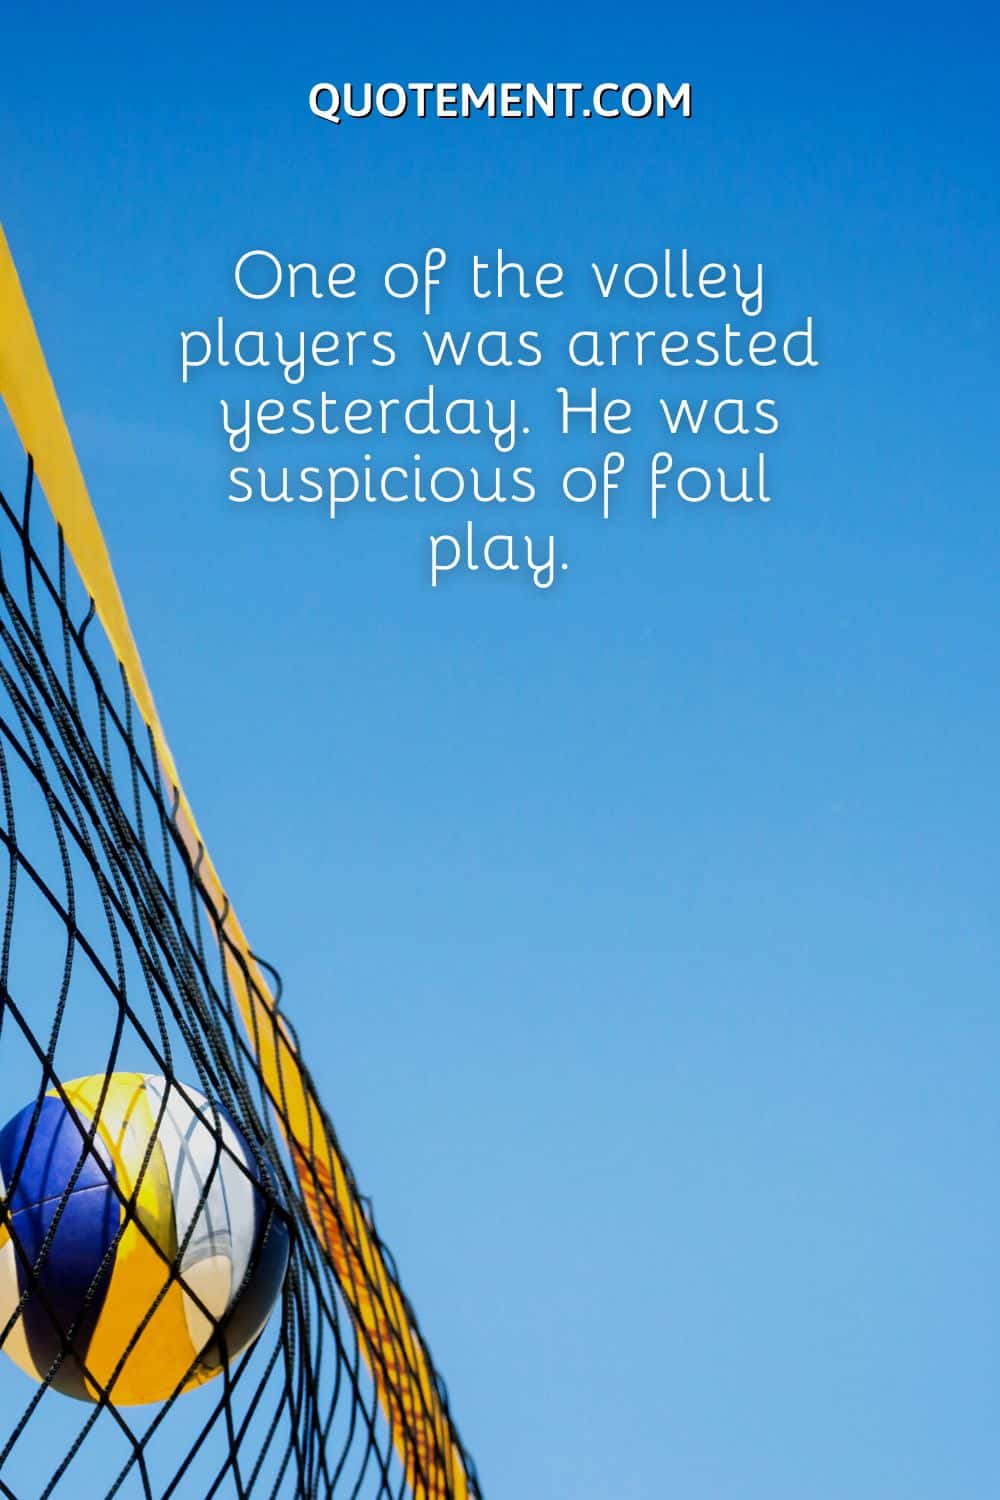 One of the volley players was arrested yesterday. He was suspicious of foul play.